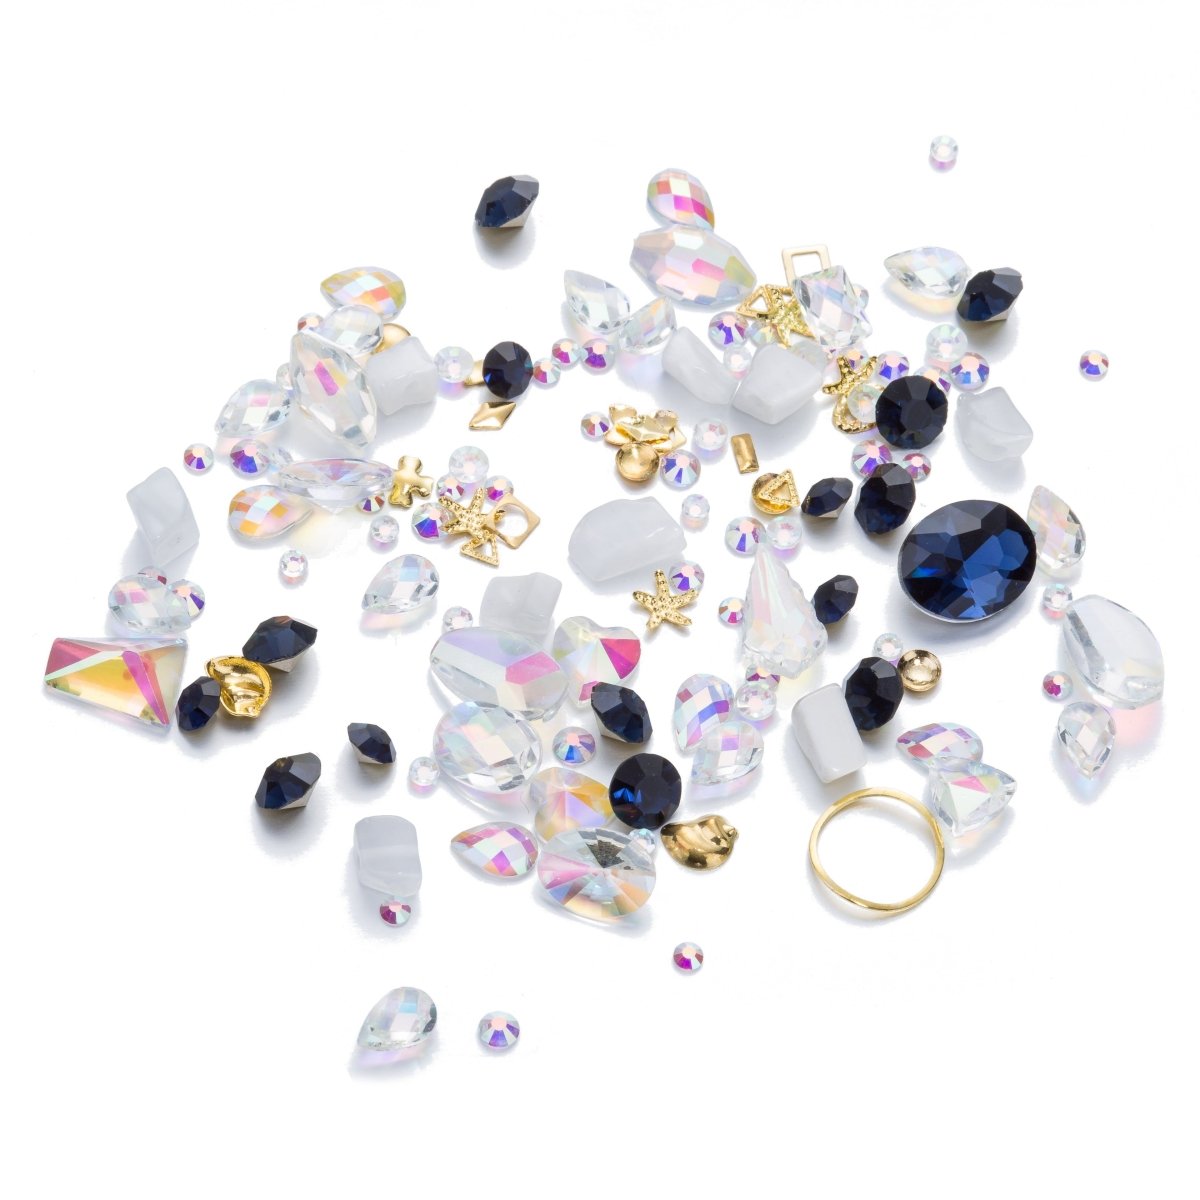 Mixed Crystal - Crystal AB, Sapphire Royal Blue Crystal, and Clear White Quartz Crystal - DLUXCA